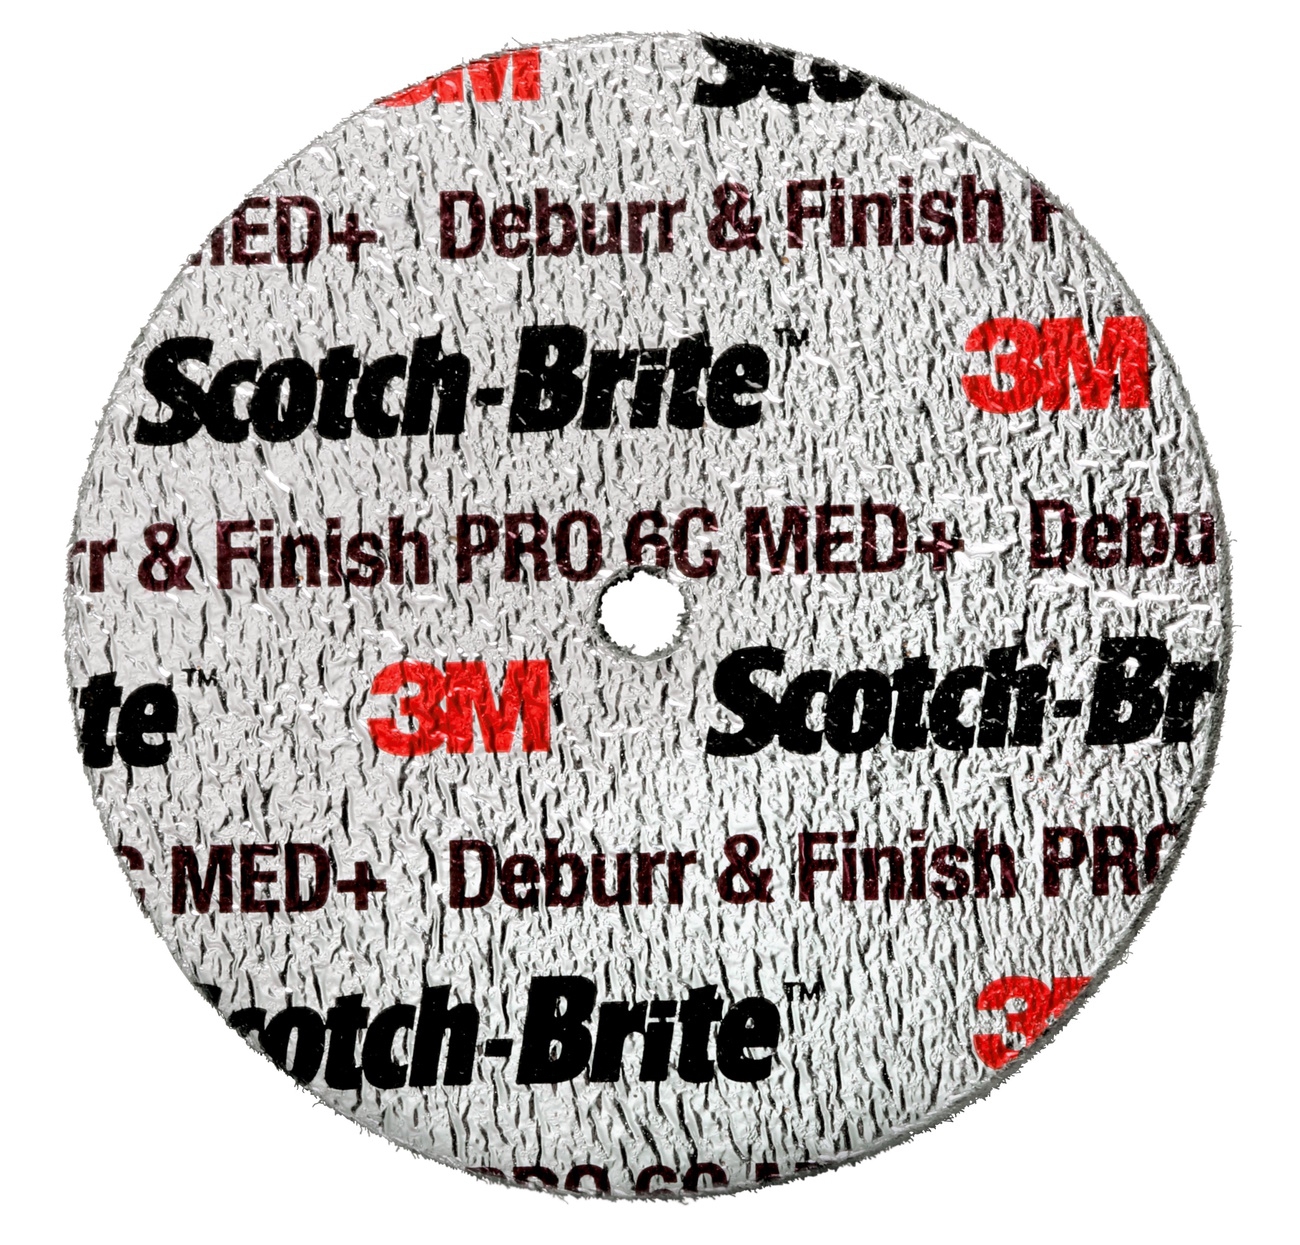 3M Scotch-Brite Deburr and Finish PRO compact disc DP-UW, 50 mm x 6,35 mm x 6,35 mm, 6C MED+